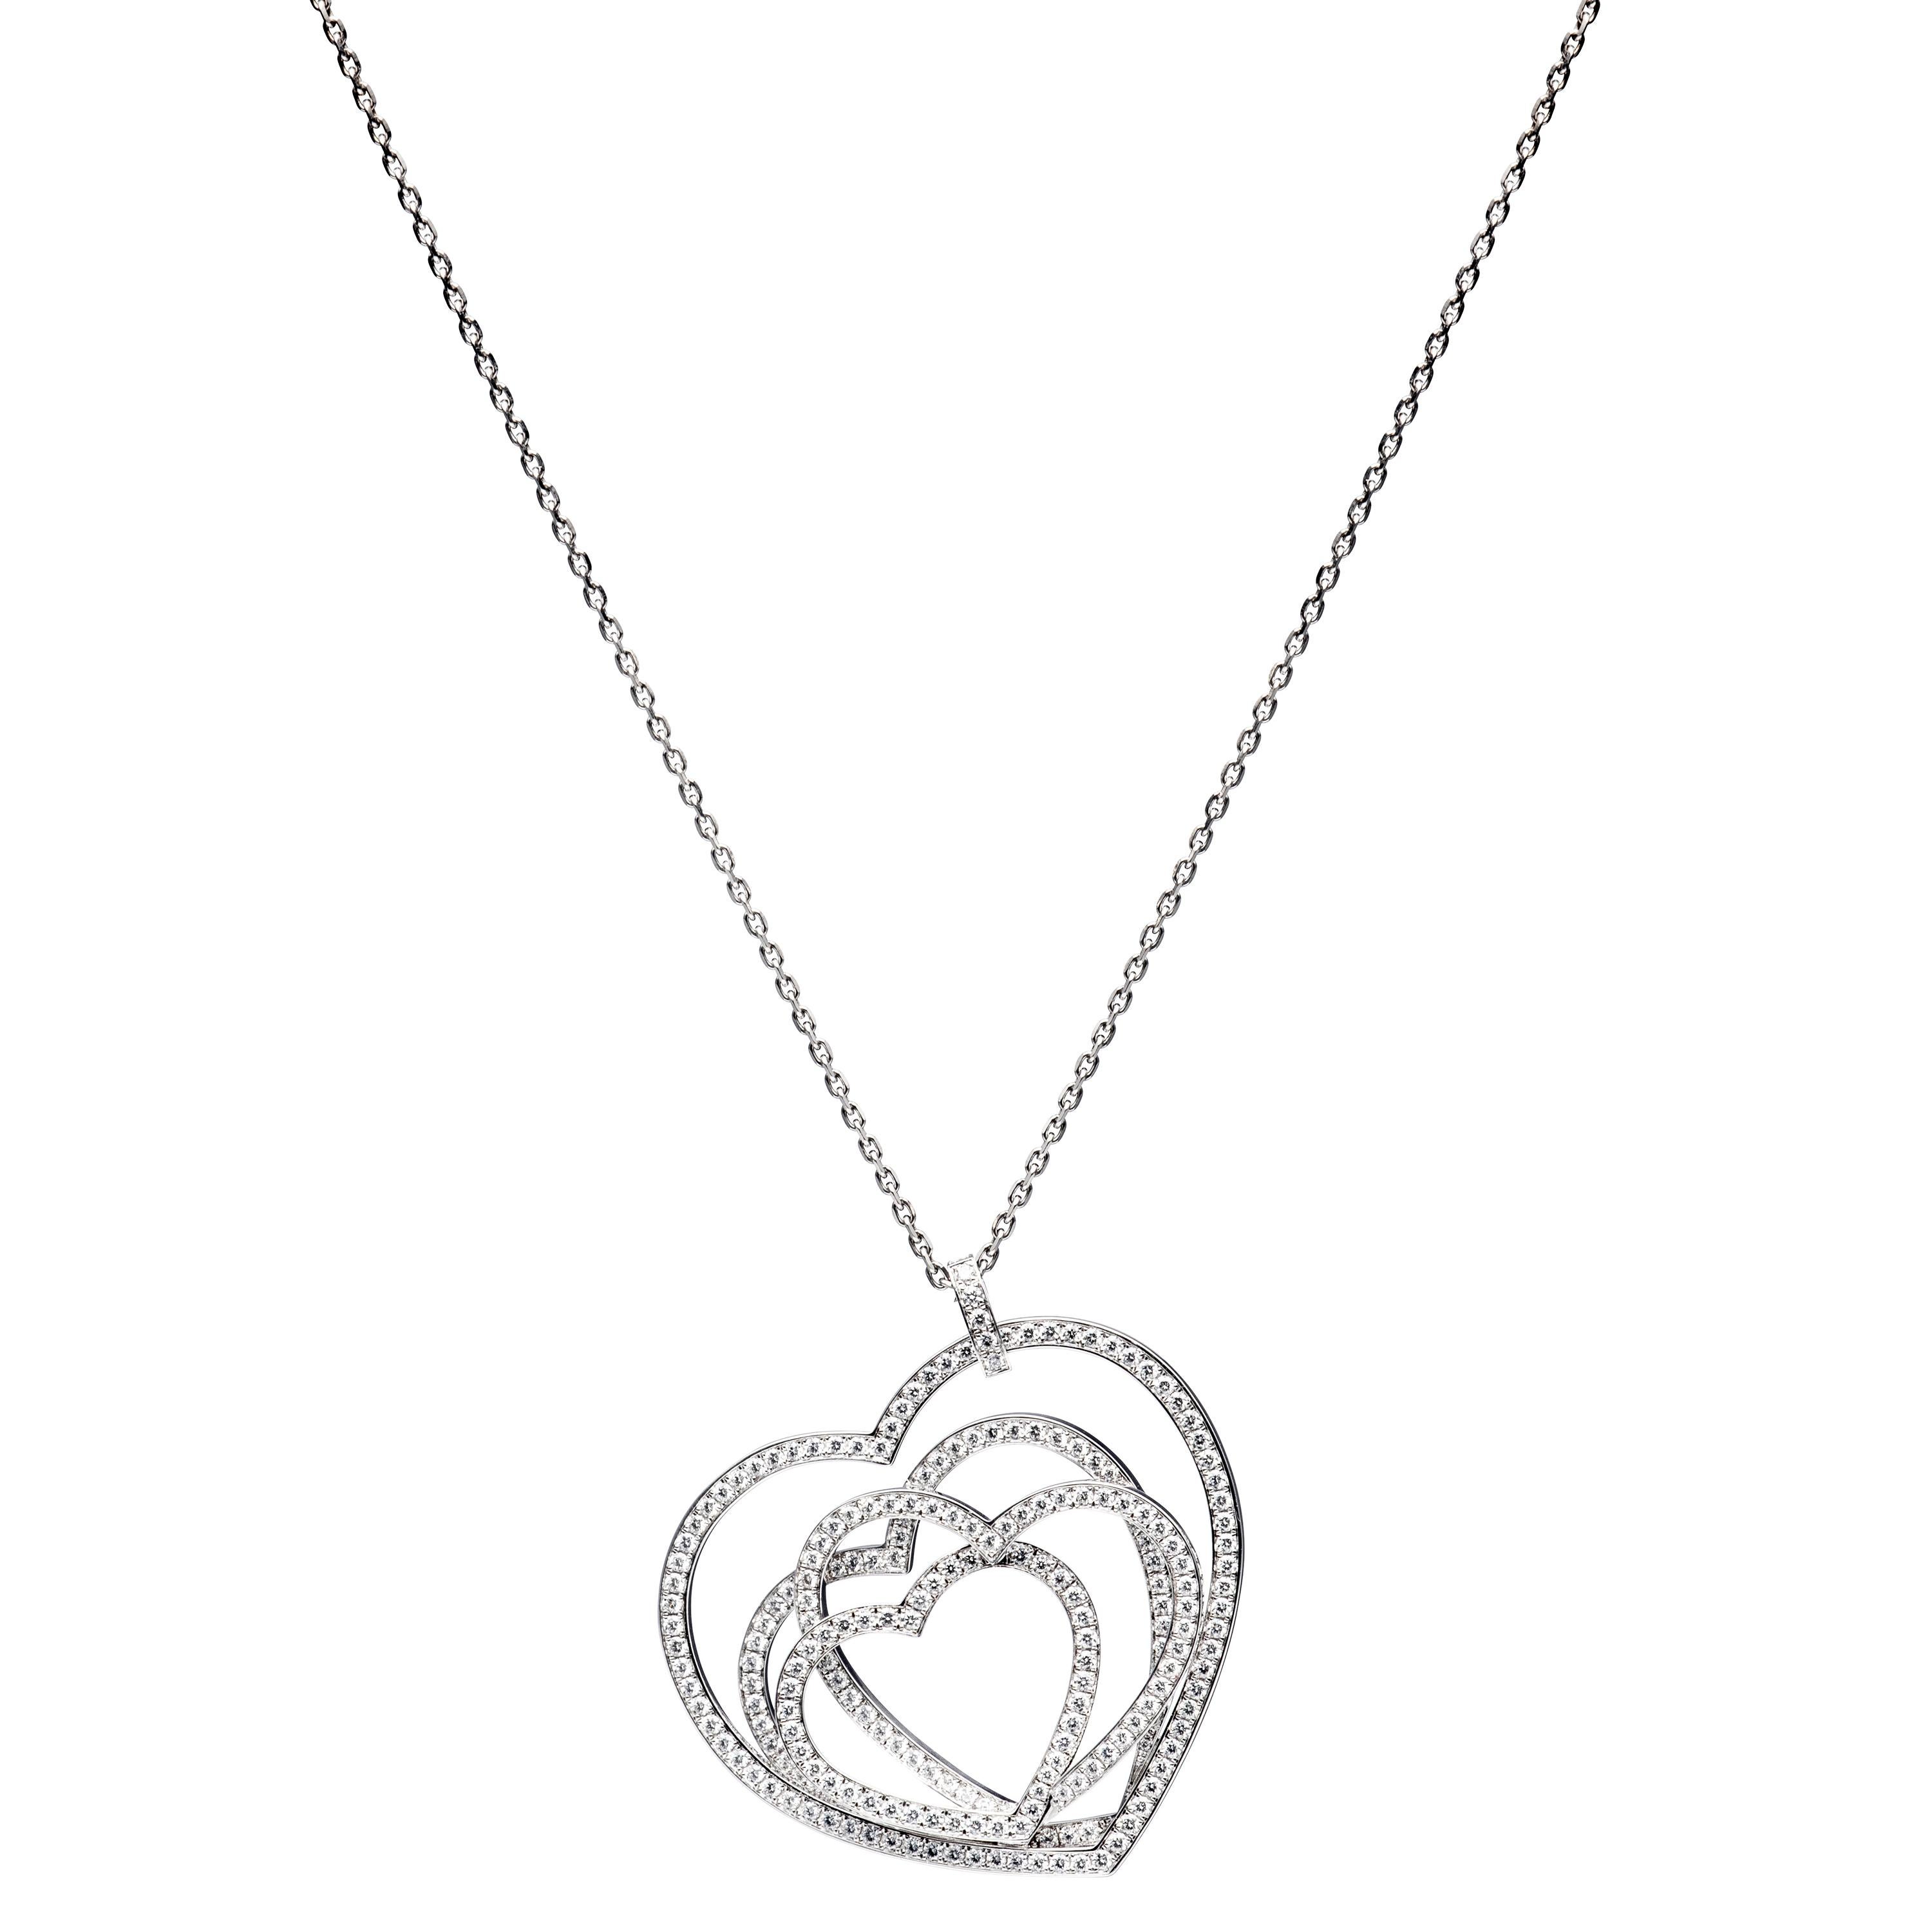 Chopard Classic Hearts Pendant

Model Number: 81/6881-1001

100% Authentic

Brand New

Comes with original Chopard box, certificate of authenticity and warranty, and jewels manual

18 Karat White Gold (12.95gr)

220 Diamonds on the Pendant